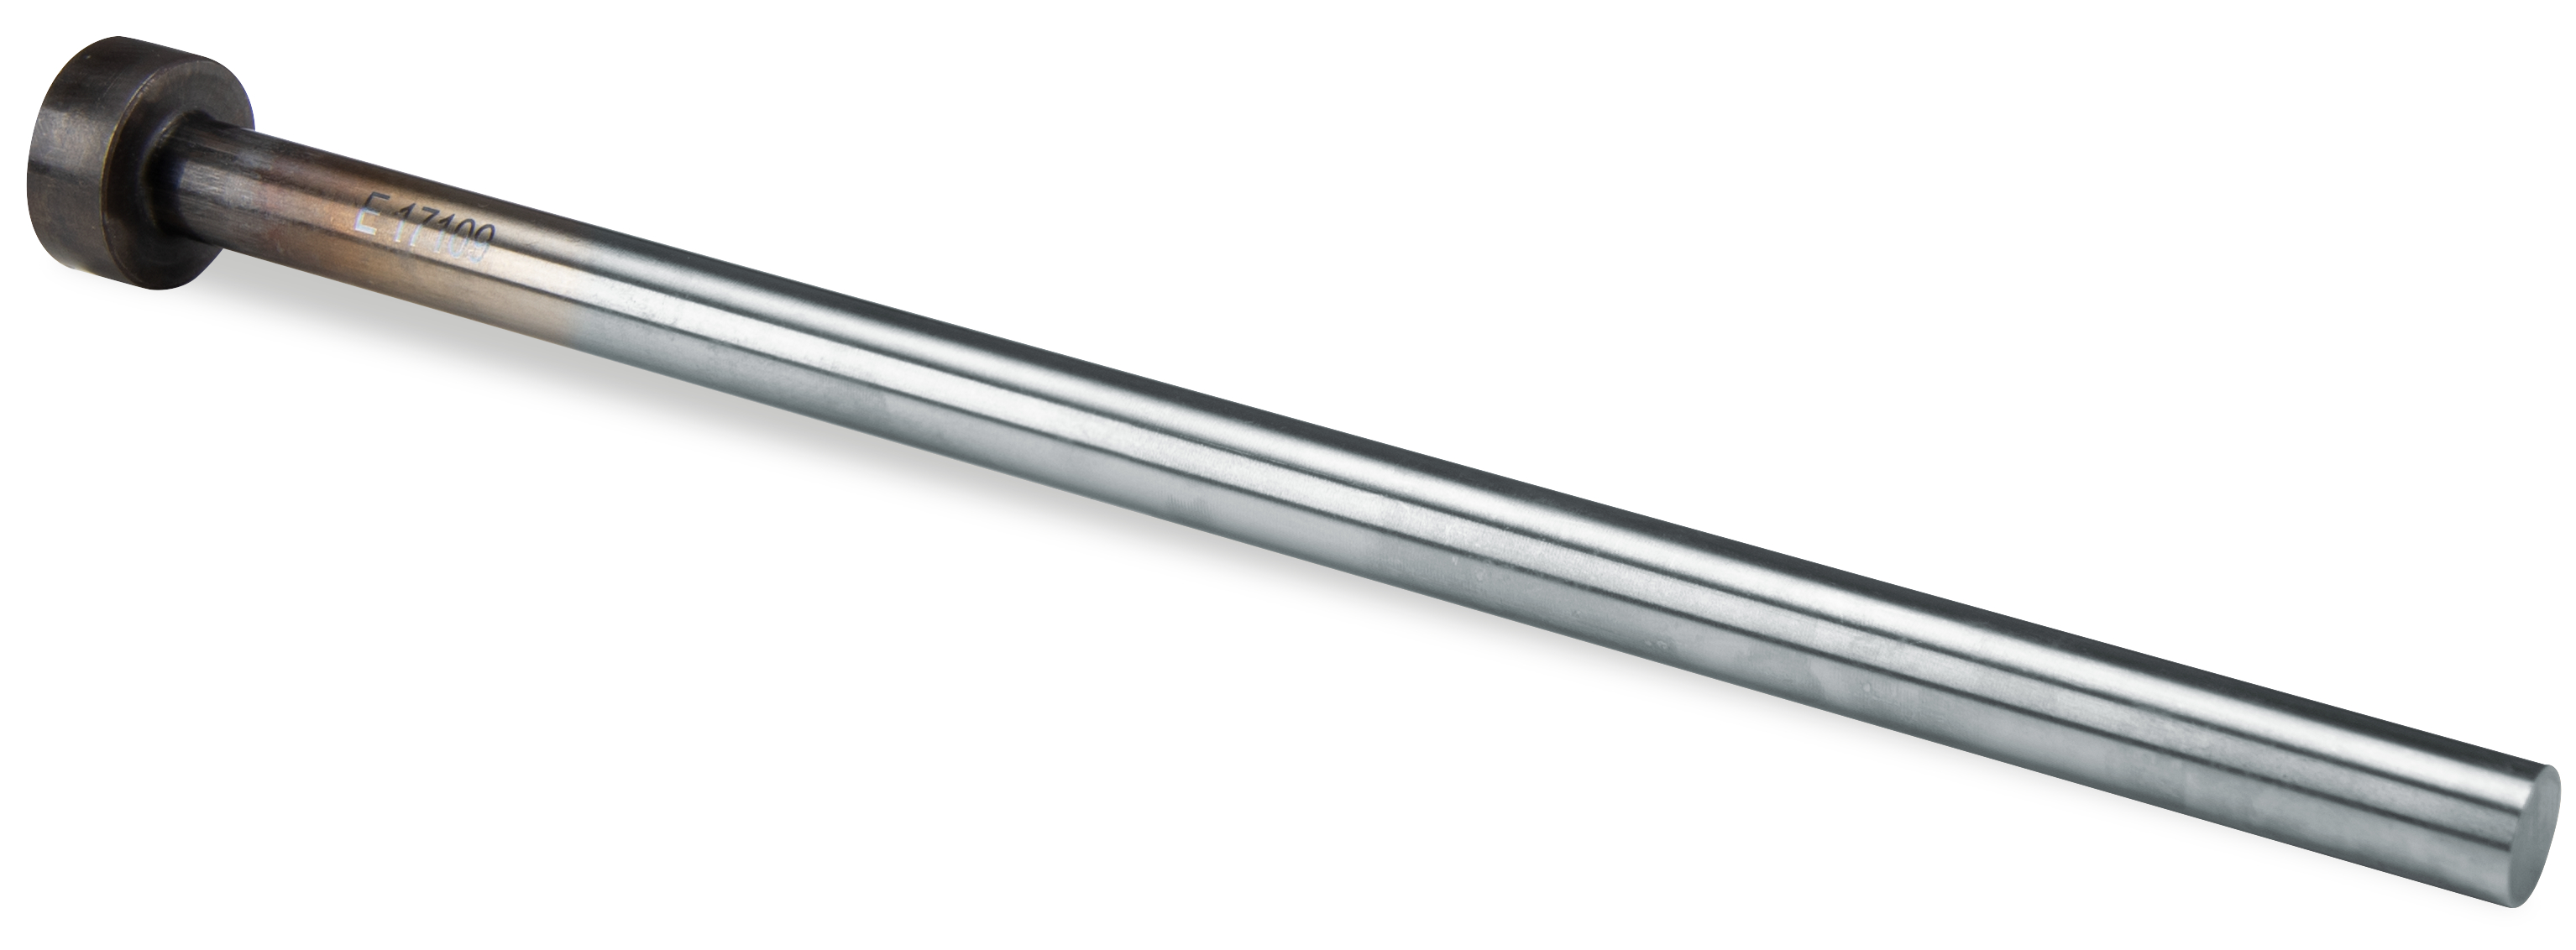 E 17109 Ejector pin, stainless steel, through-hardened  